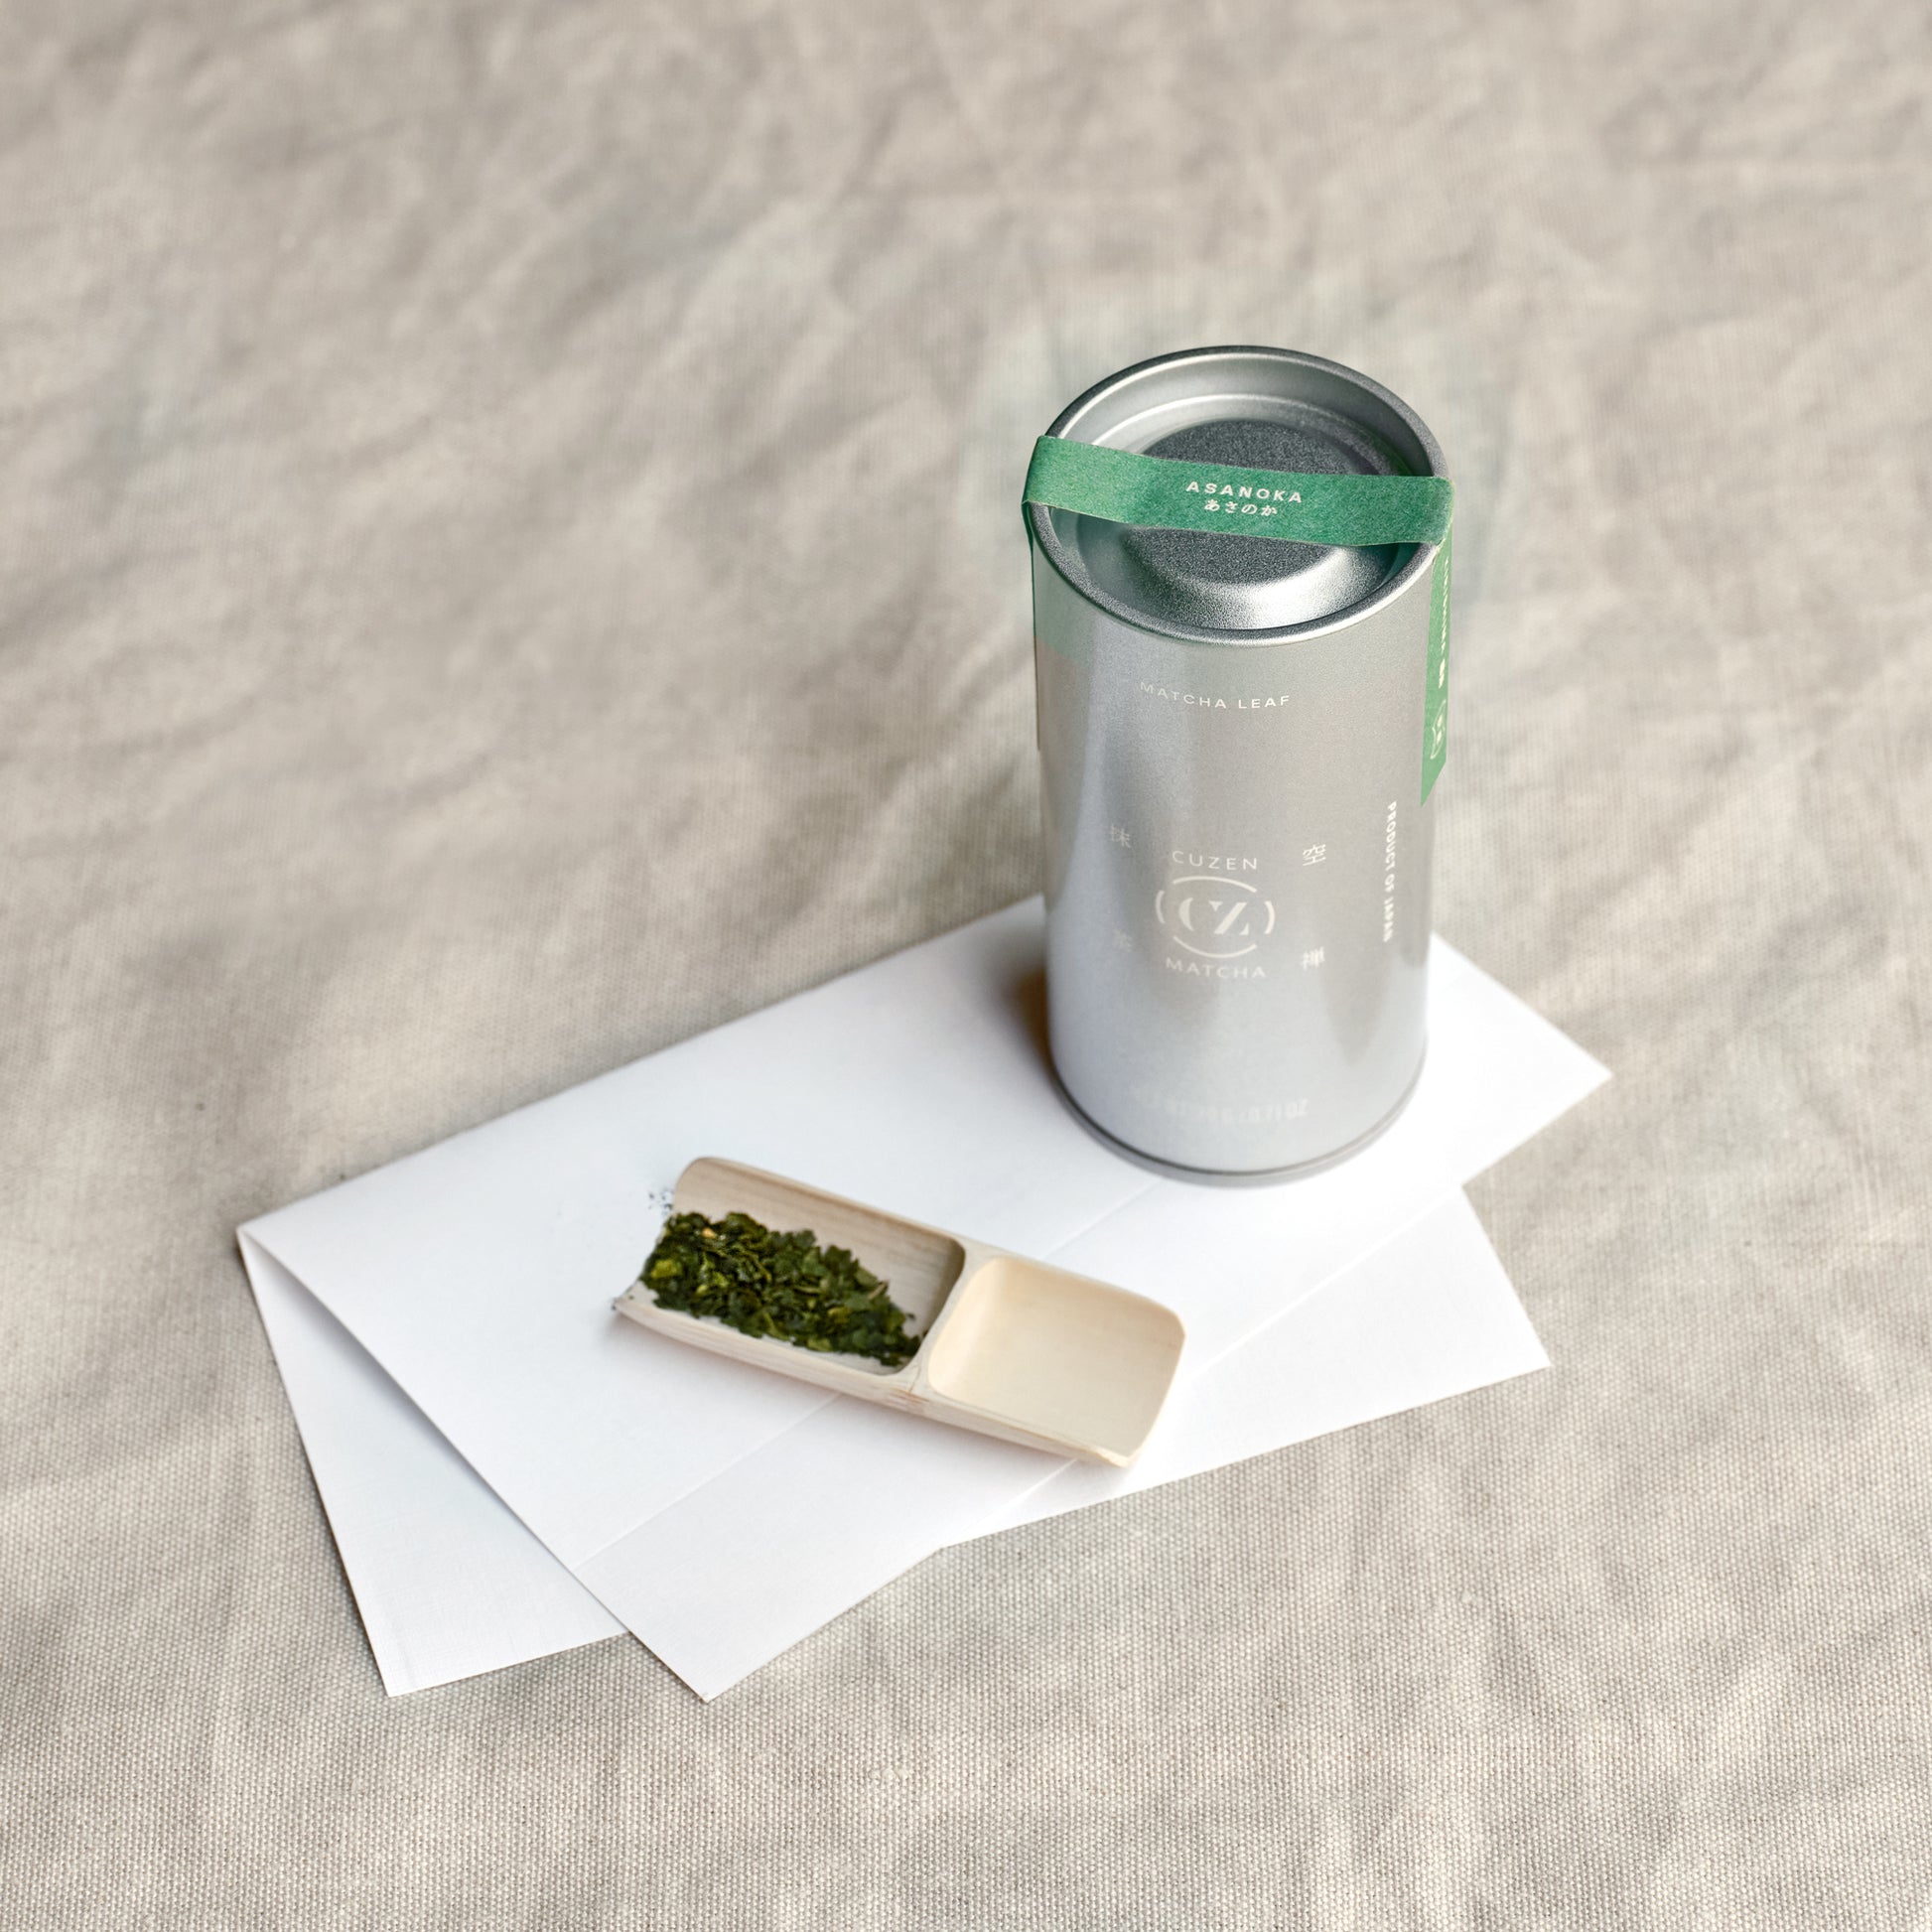 A canister of Single Origin Matcha Leaf from Asanoka, next to a bamboo scoop of Matcha Leaf.